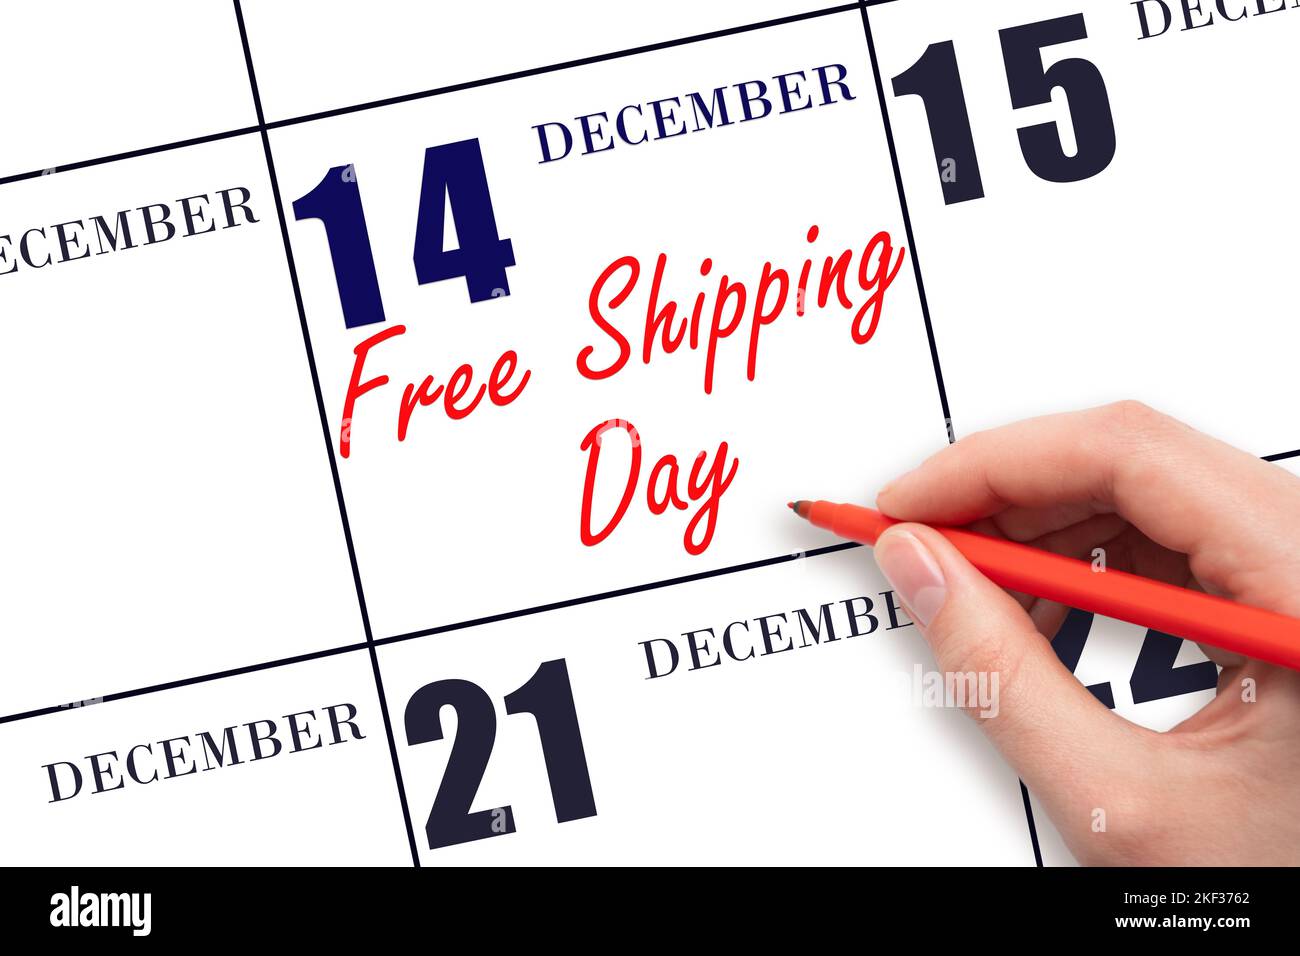 December 14. Hand writing text Free Shipping Day on calendar date. Save the date. Day of the year concept. Stock Photo